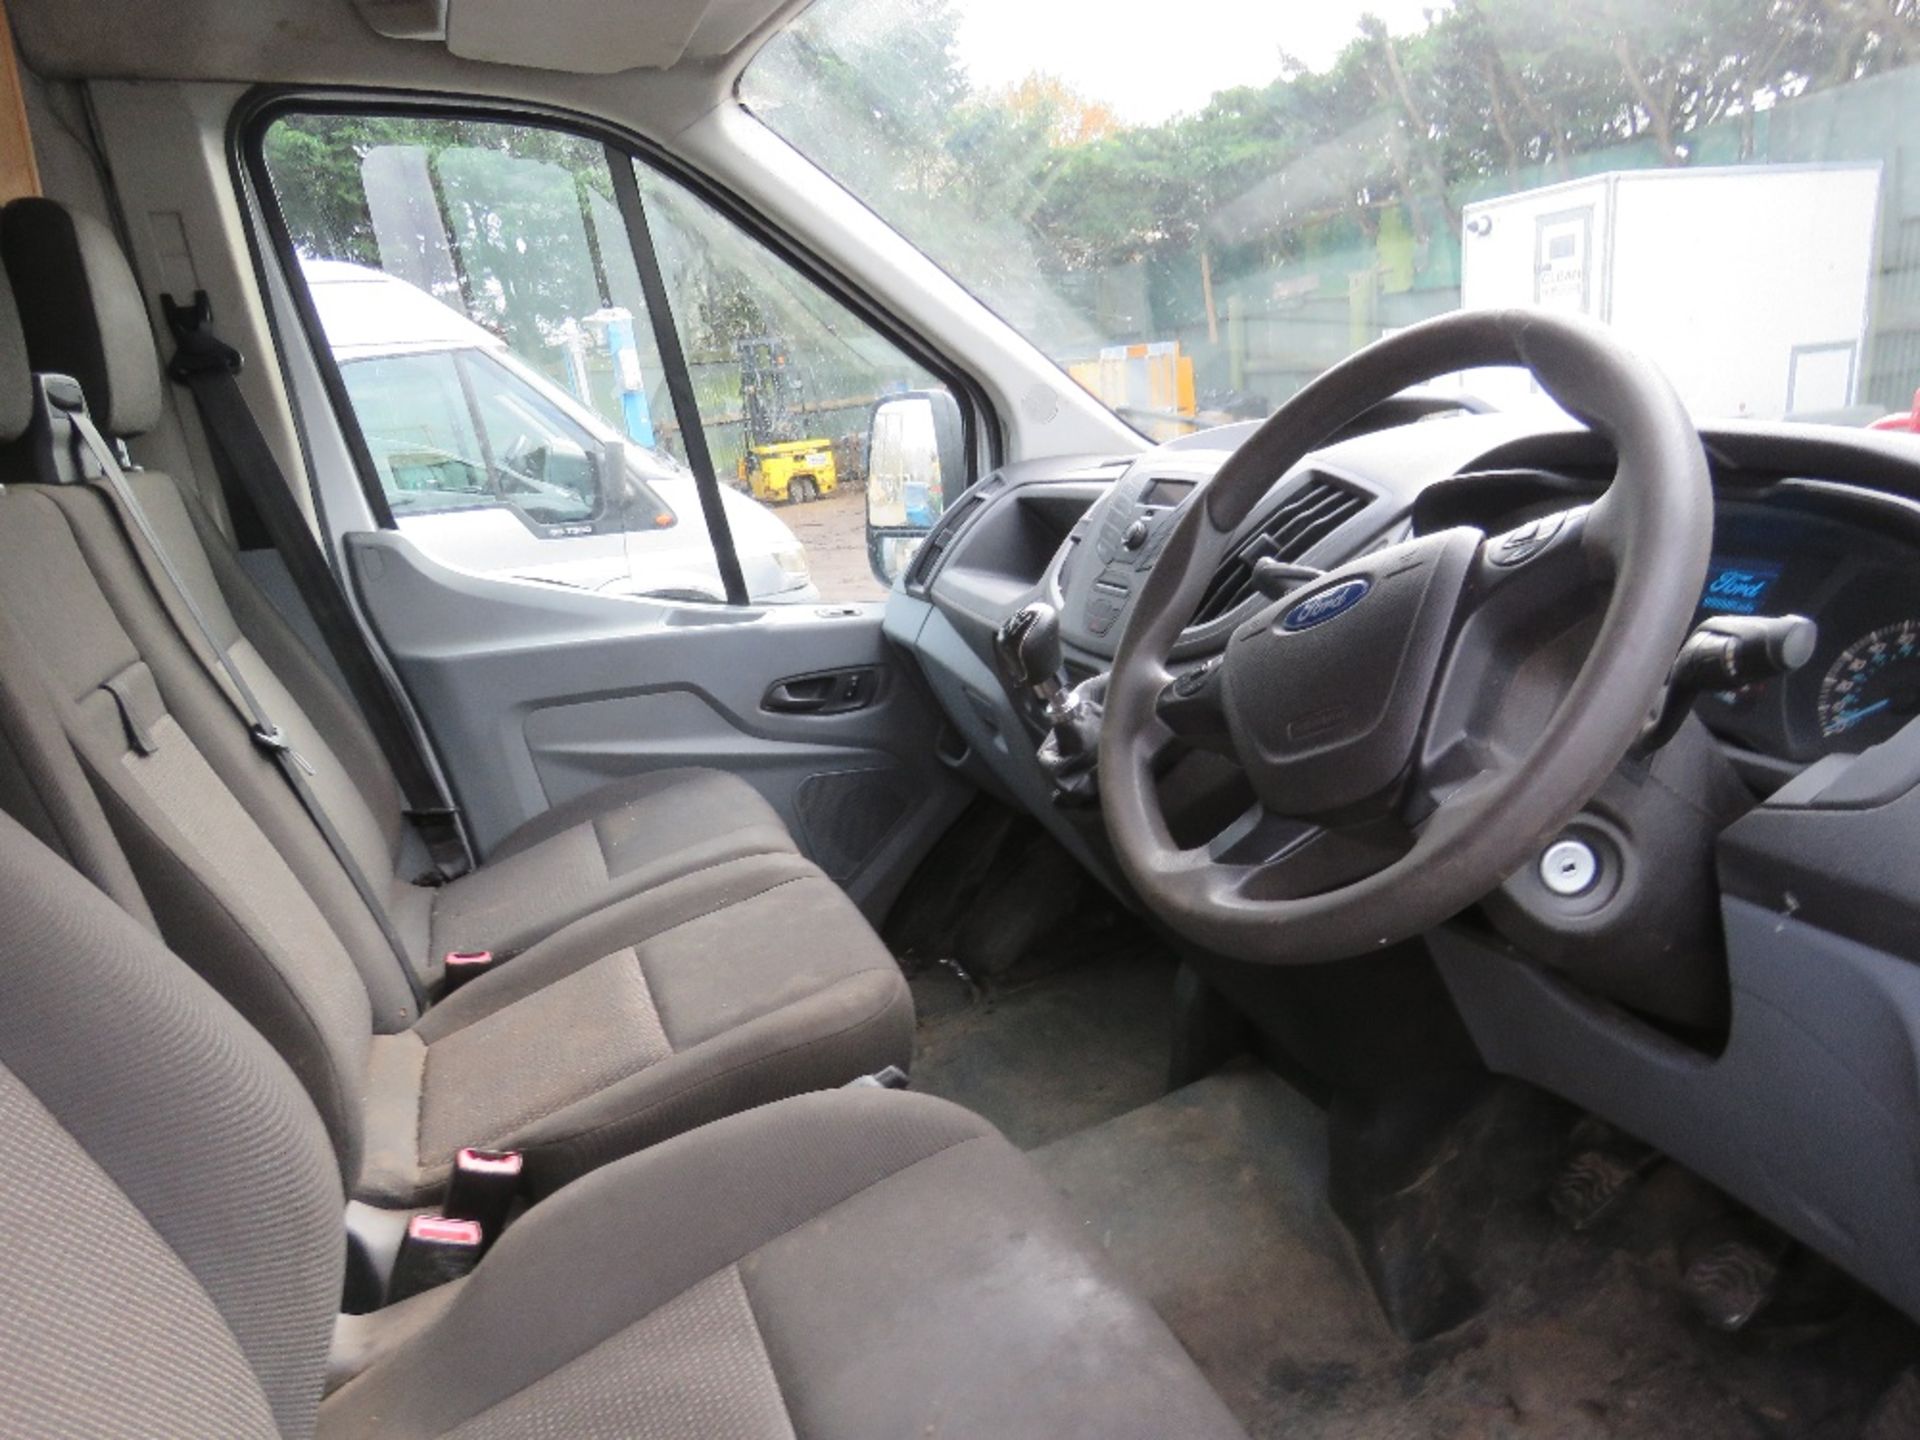 FORD TRANSIT 350 HIGH TOP LONG WHEEL BASE PANEL VAN REG:AJ64 DXC.EURO 5 EMMISSIONS. WITH V5. ONE OWN - Image 8 of 18